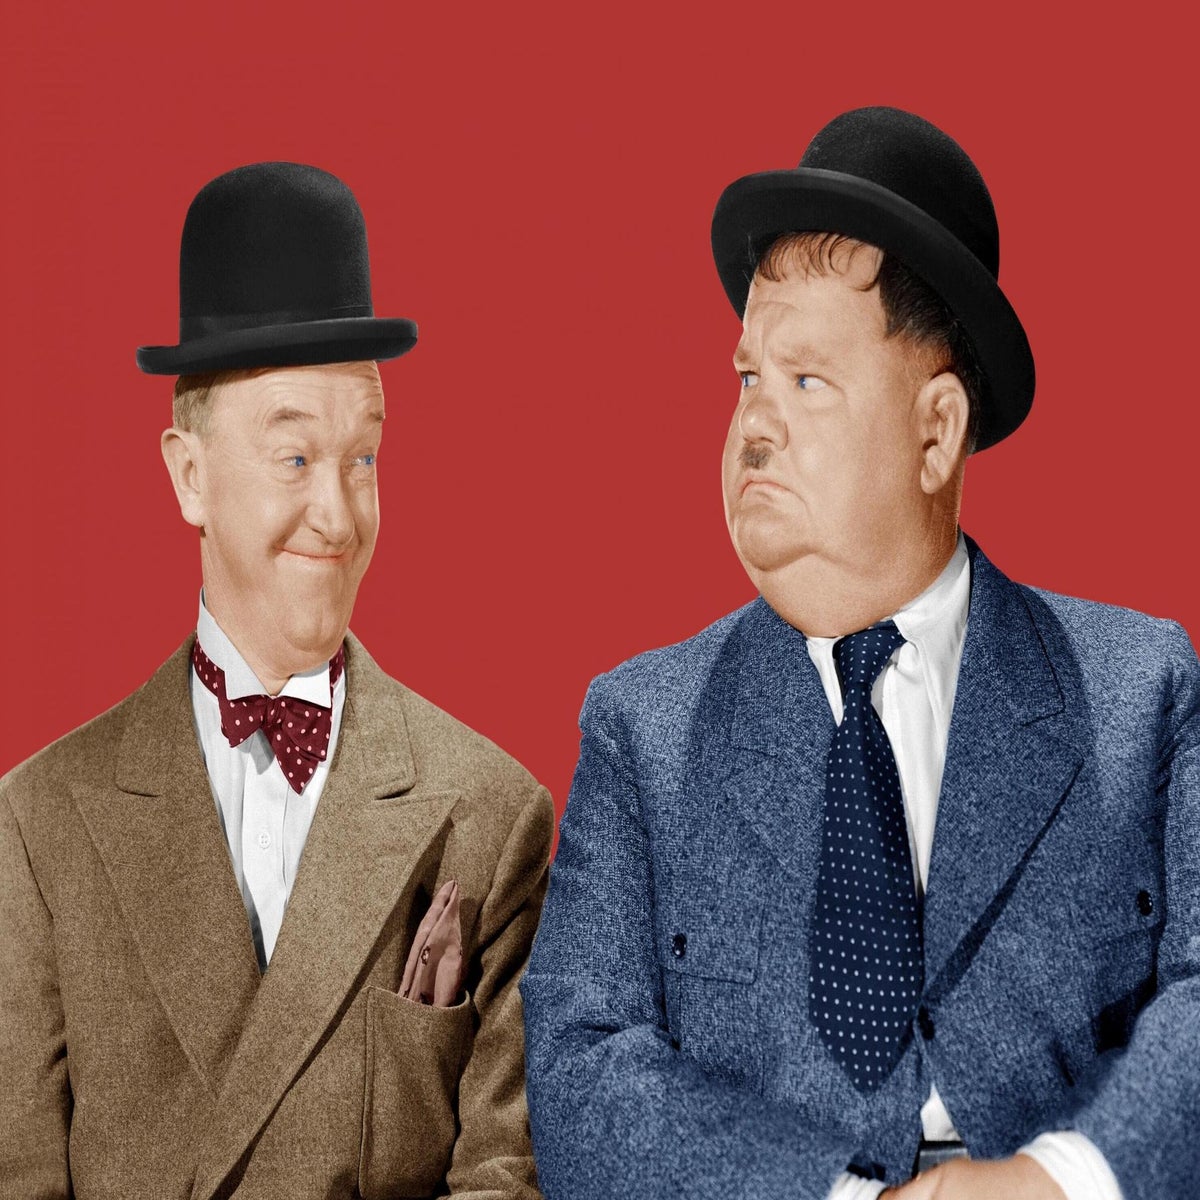 Laurel and Hardy: Two angels of our time, The Independent